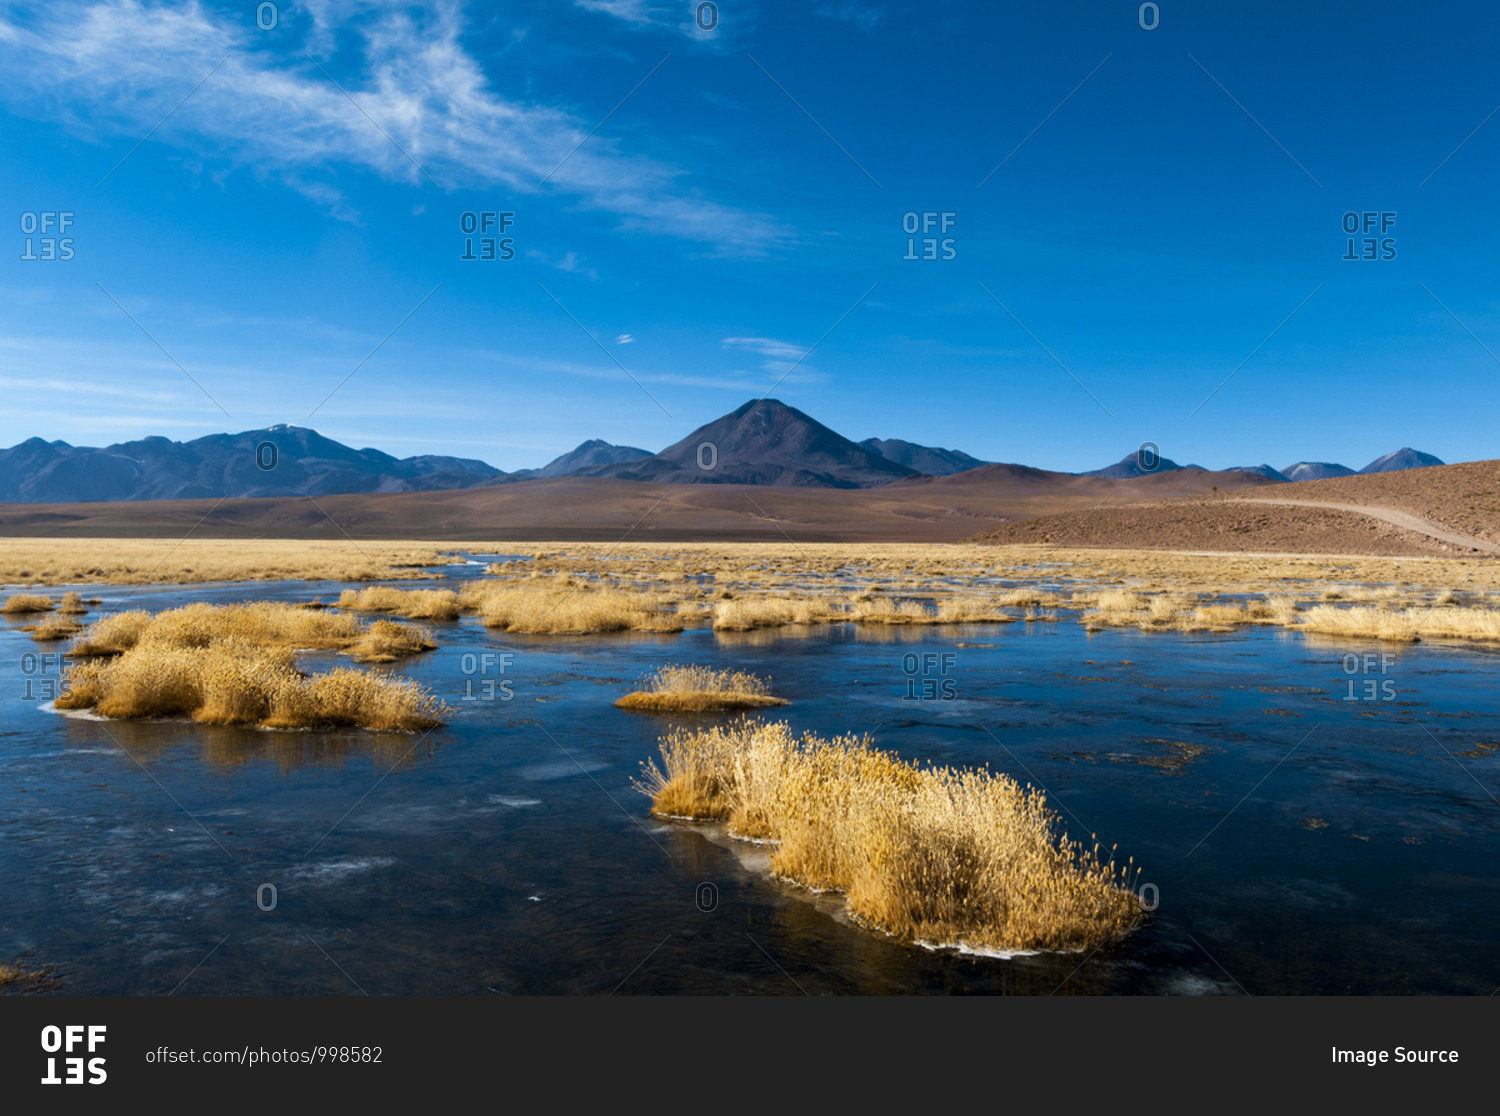 Vado Rio Putana and Putana Volcano, water and reed islands in a river, and view of mountains, Atacama Desert, Chile